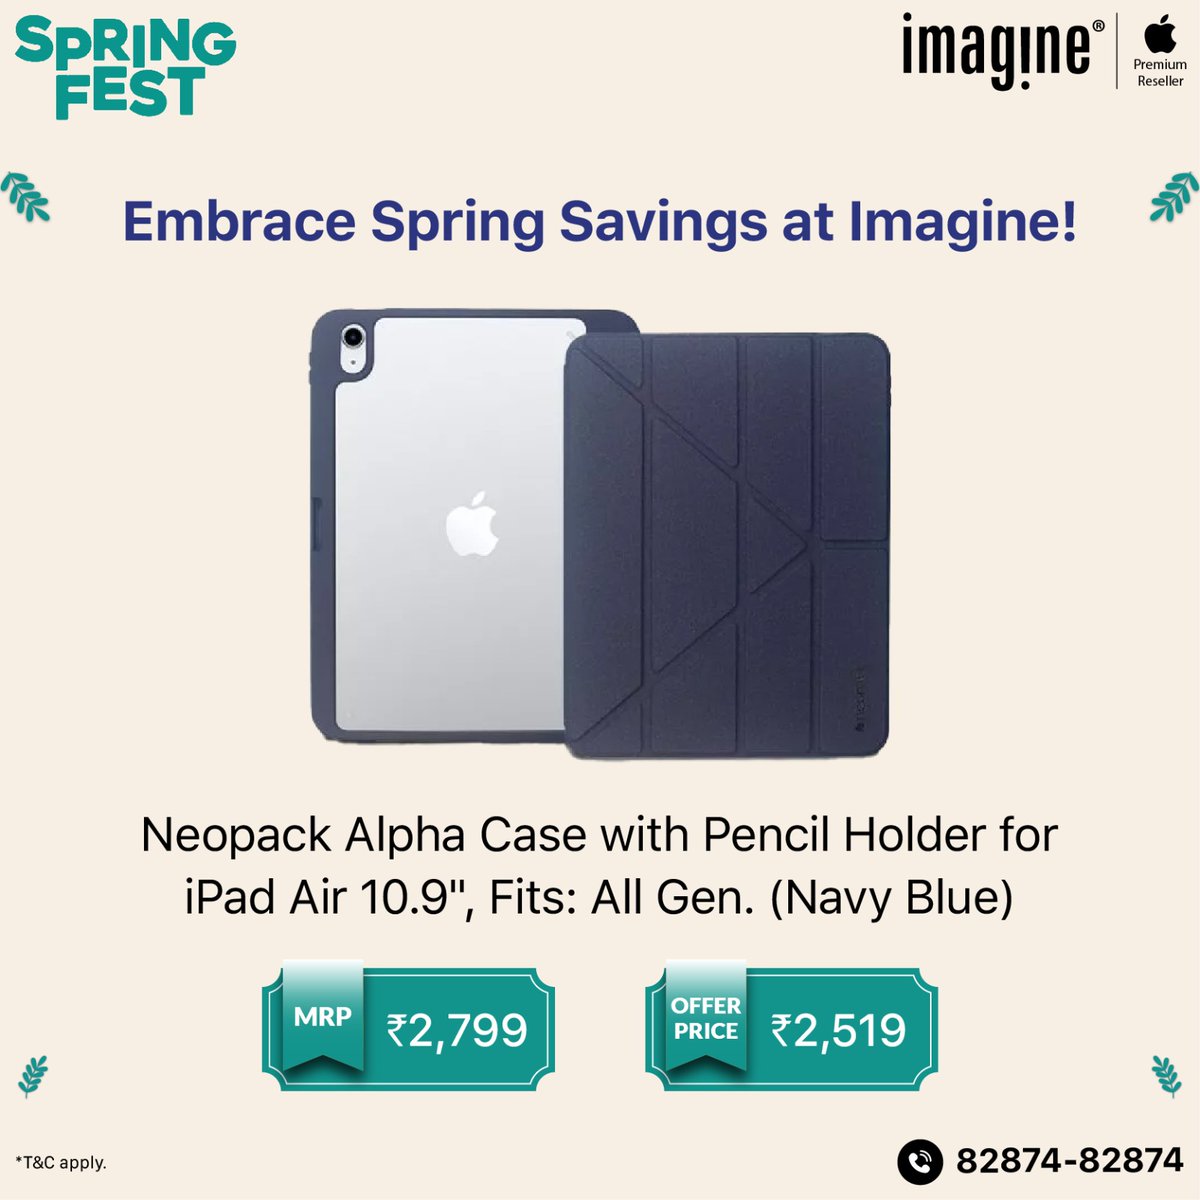 Embrace Spring Savings at Imagine! 🍃 Switch to latest iPad now at Imagine! ✅ Upto ₹3,000* Instant Cashback on ICICI Bank Debit and Credit cards and SBI Credit cards. ✅ Upto ₹4,000* Instant In-store discount ✅ Get speaker worth ₹10,900* ✅ GST Invoice available ✅ Upto 24